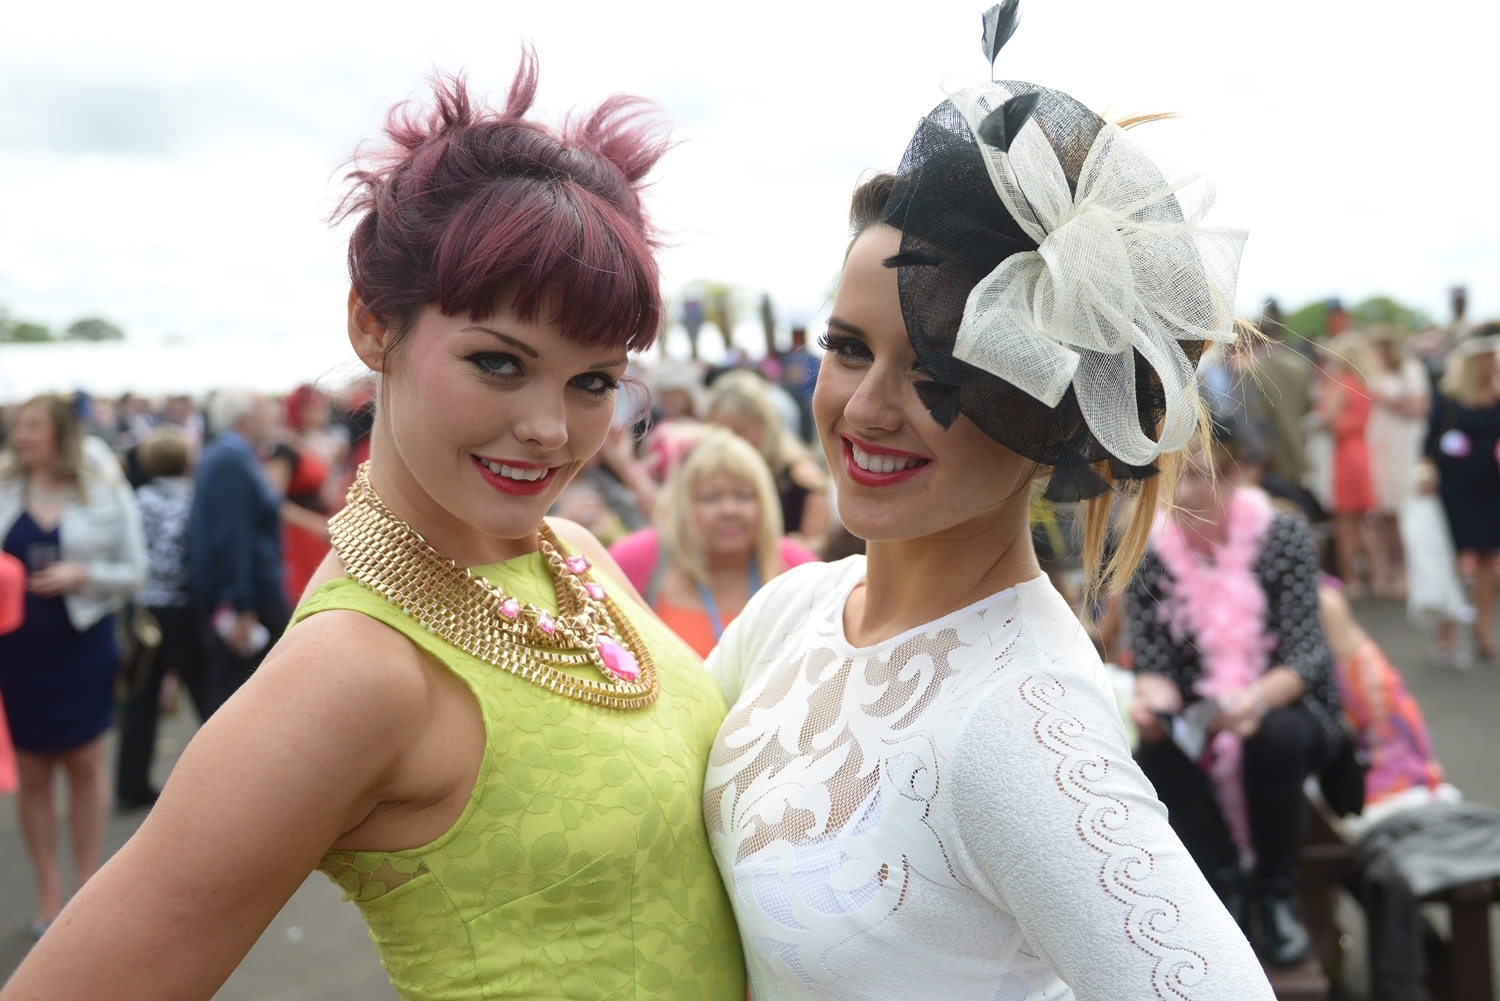 Kim Cessford - 15.05.14 - pictured enjoying Ladies Day at the Perth Races are l to r - Kirsten Cameron and Tanya McDonald